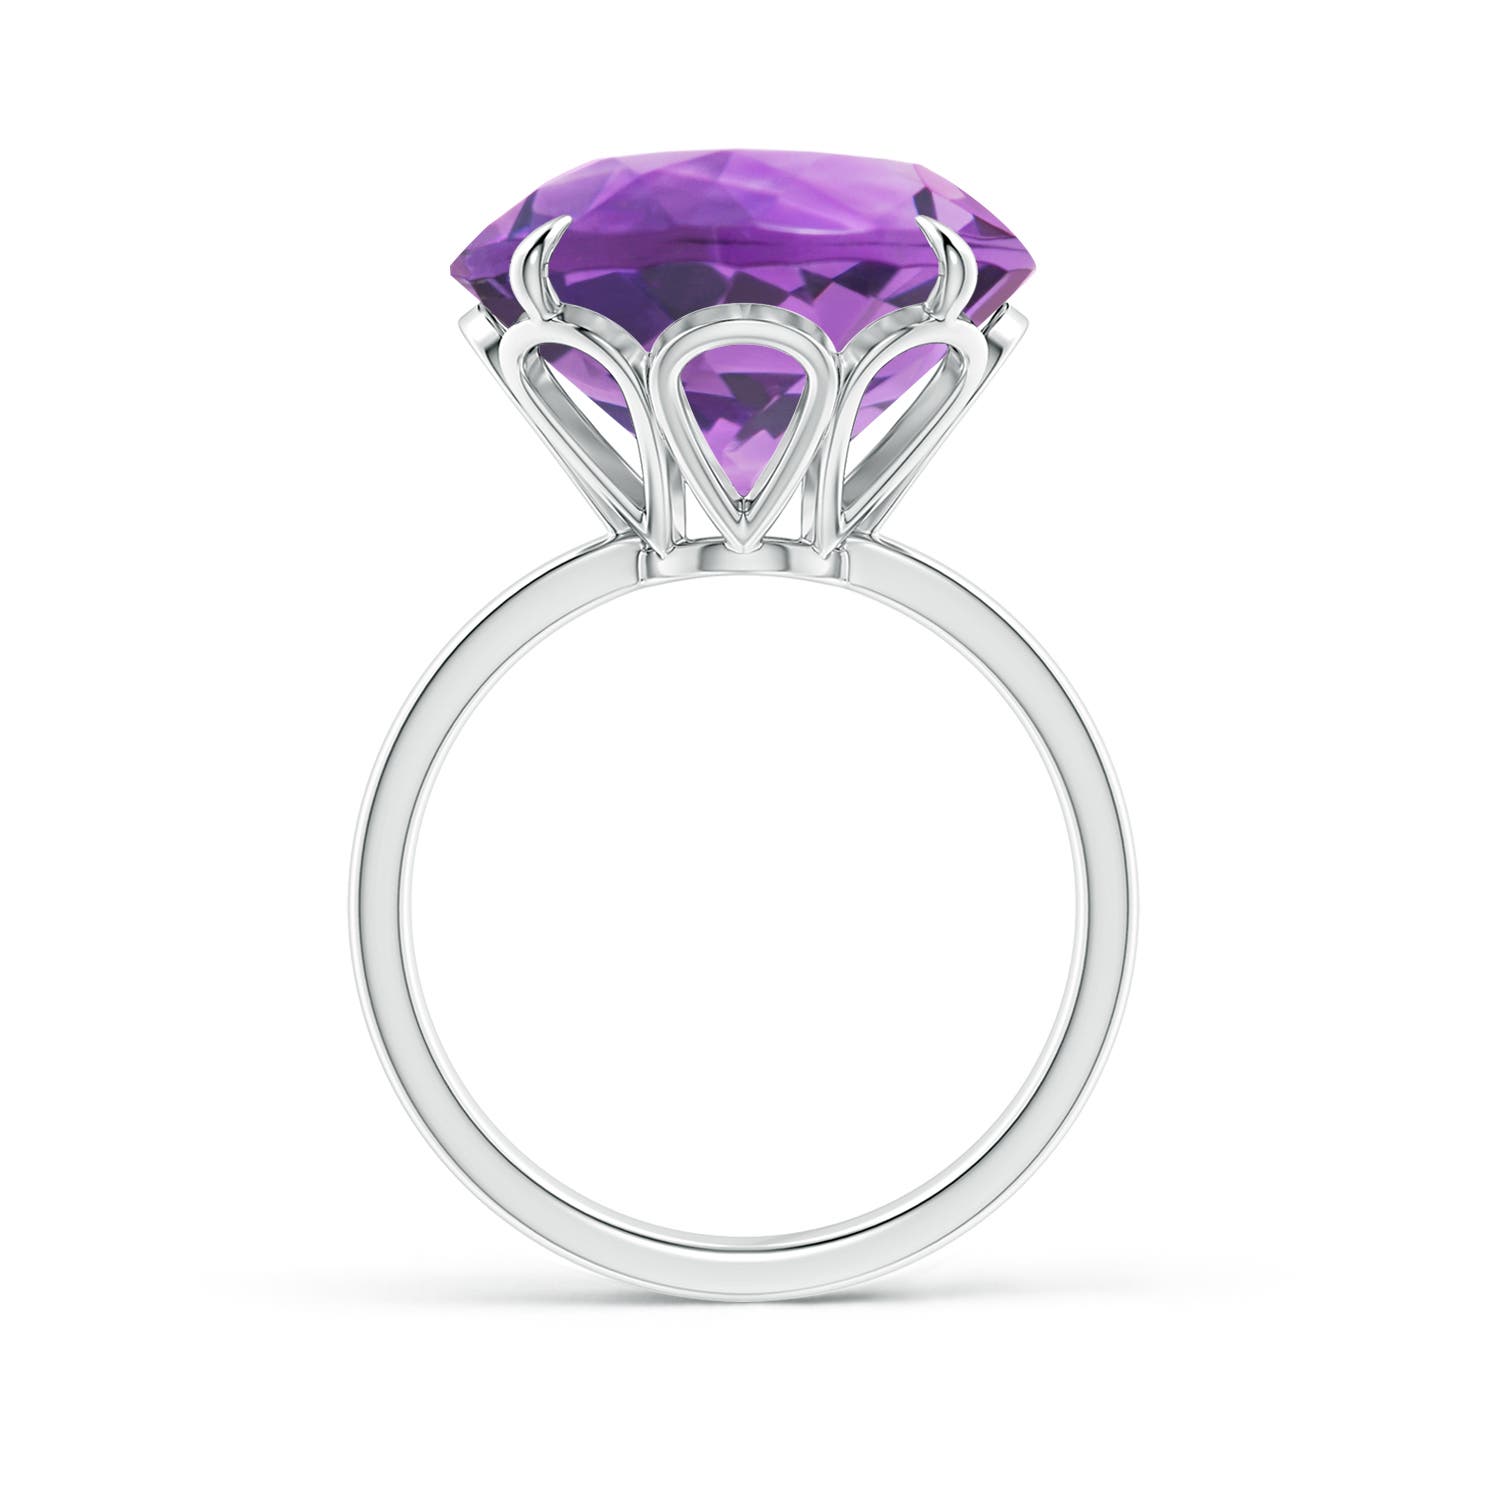 AA - Amethyst / 11 CT / 14 KT White Gold